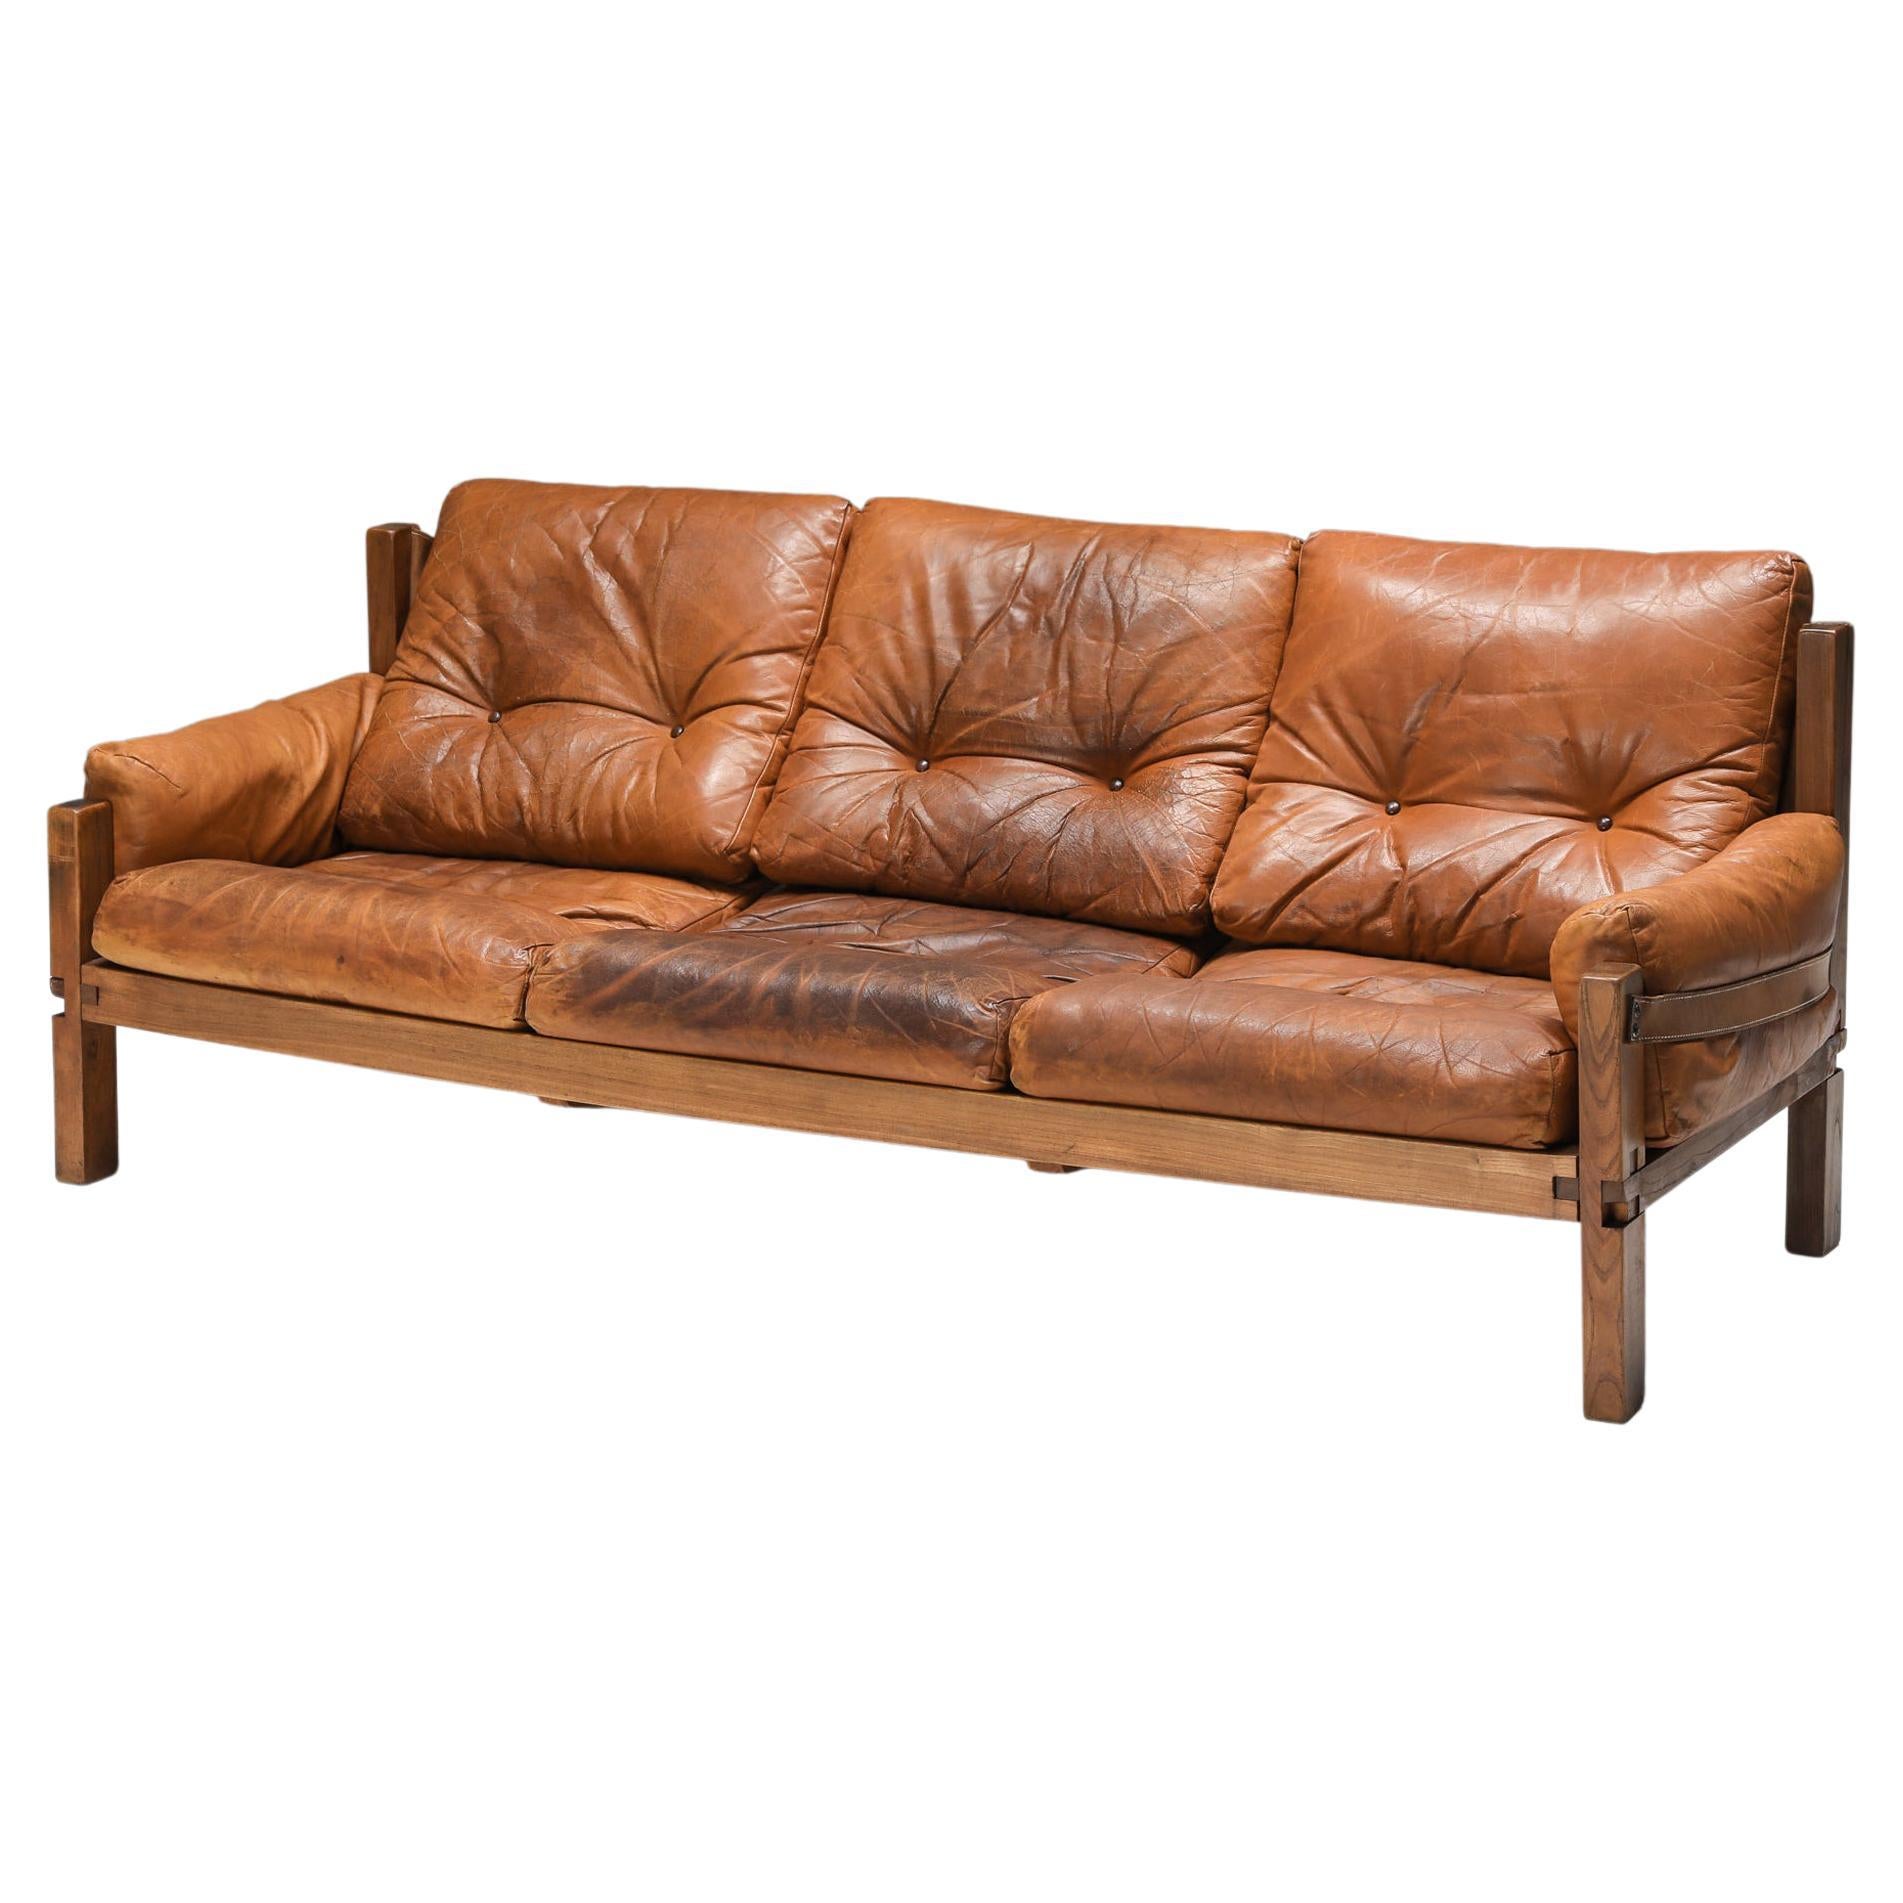 Pierre Chapo S32 Elm & Leather Sofa, inspired by Charlotte Perriand, French